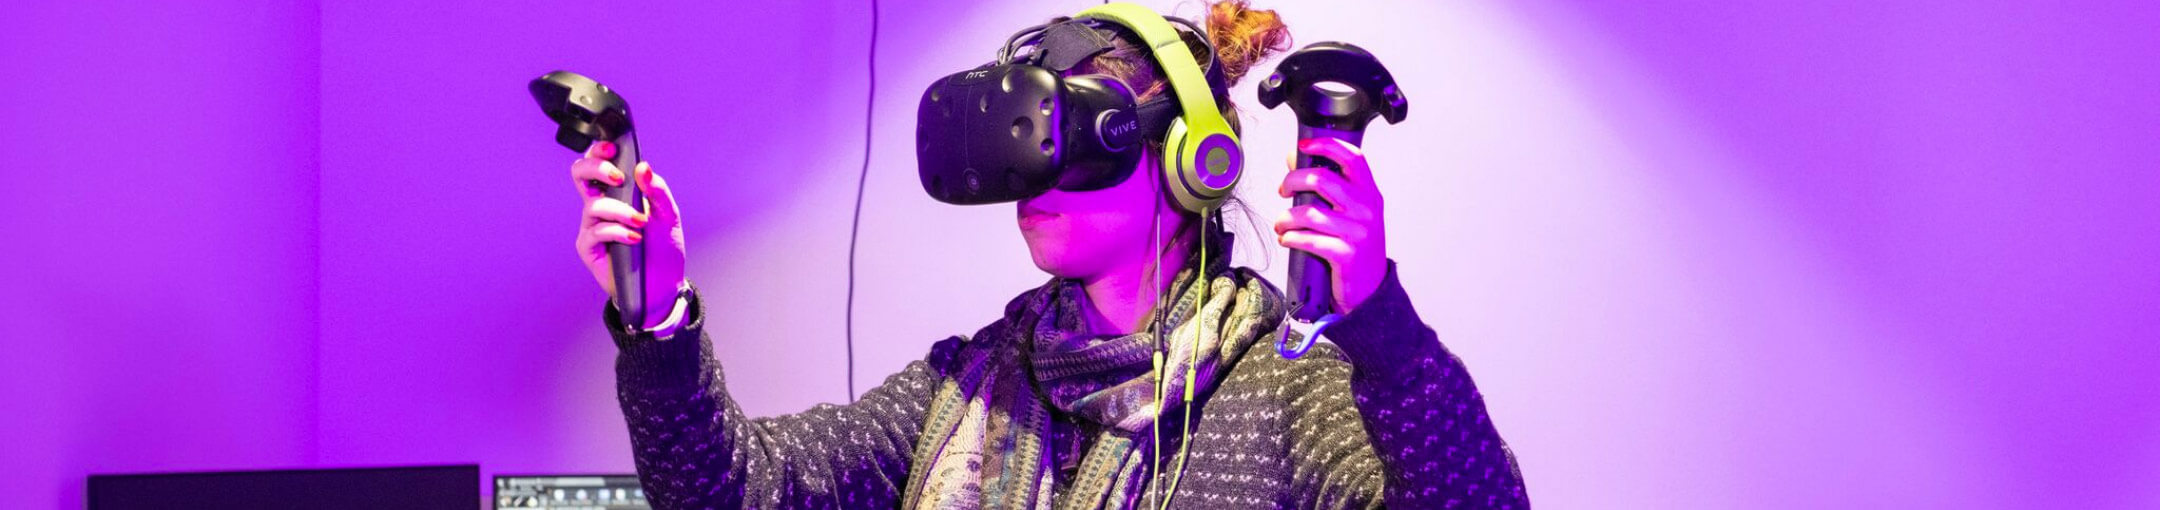 A student using an HTC Vive VR headset and controllers.